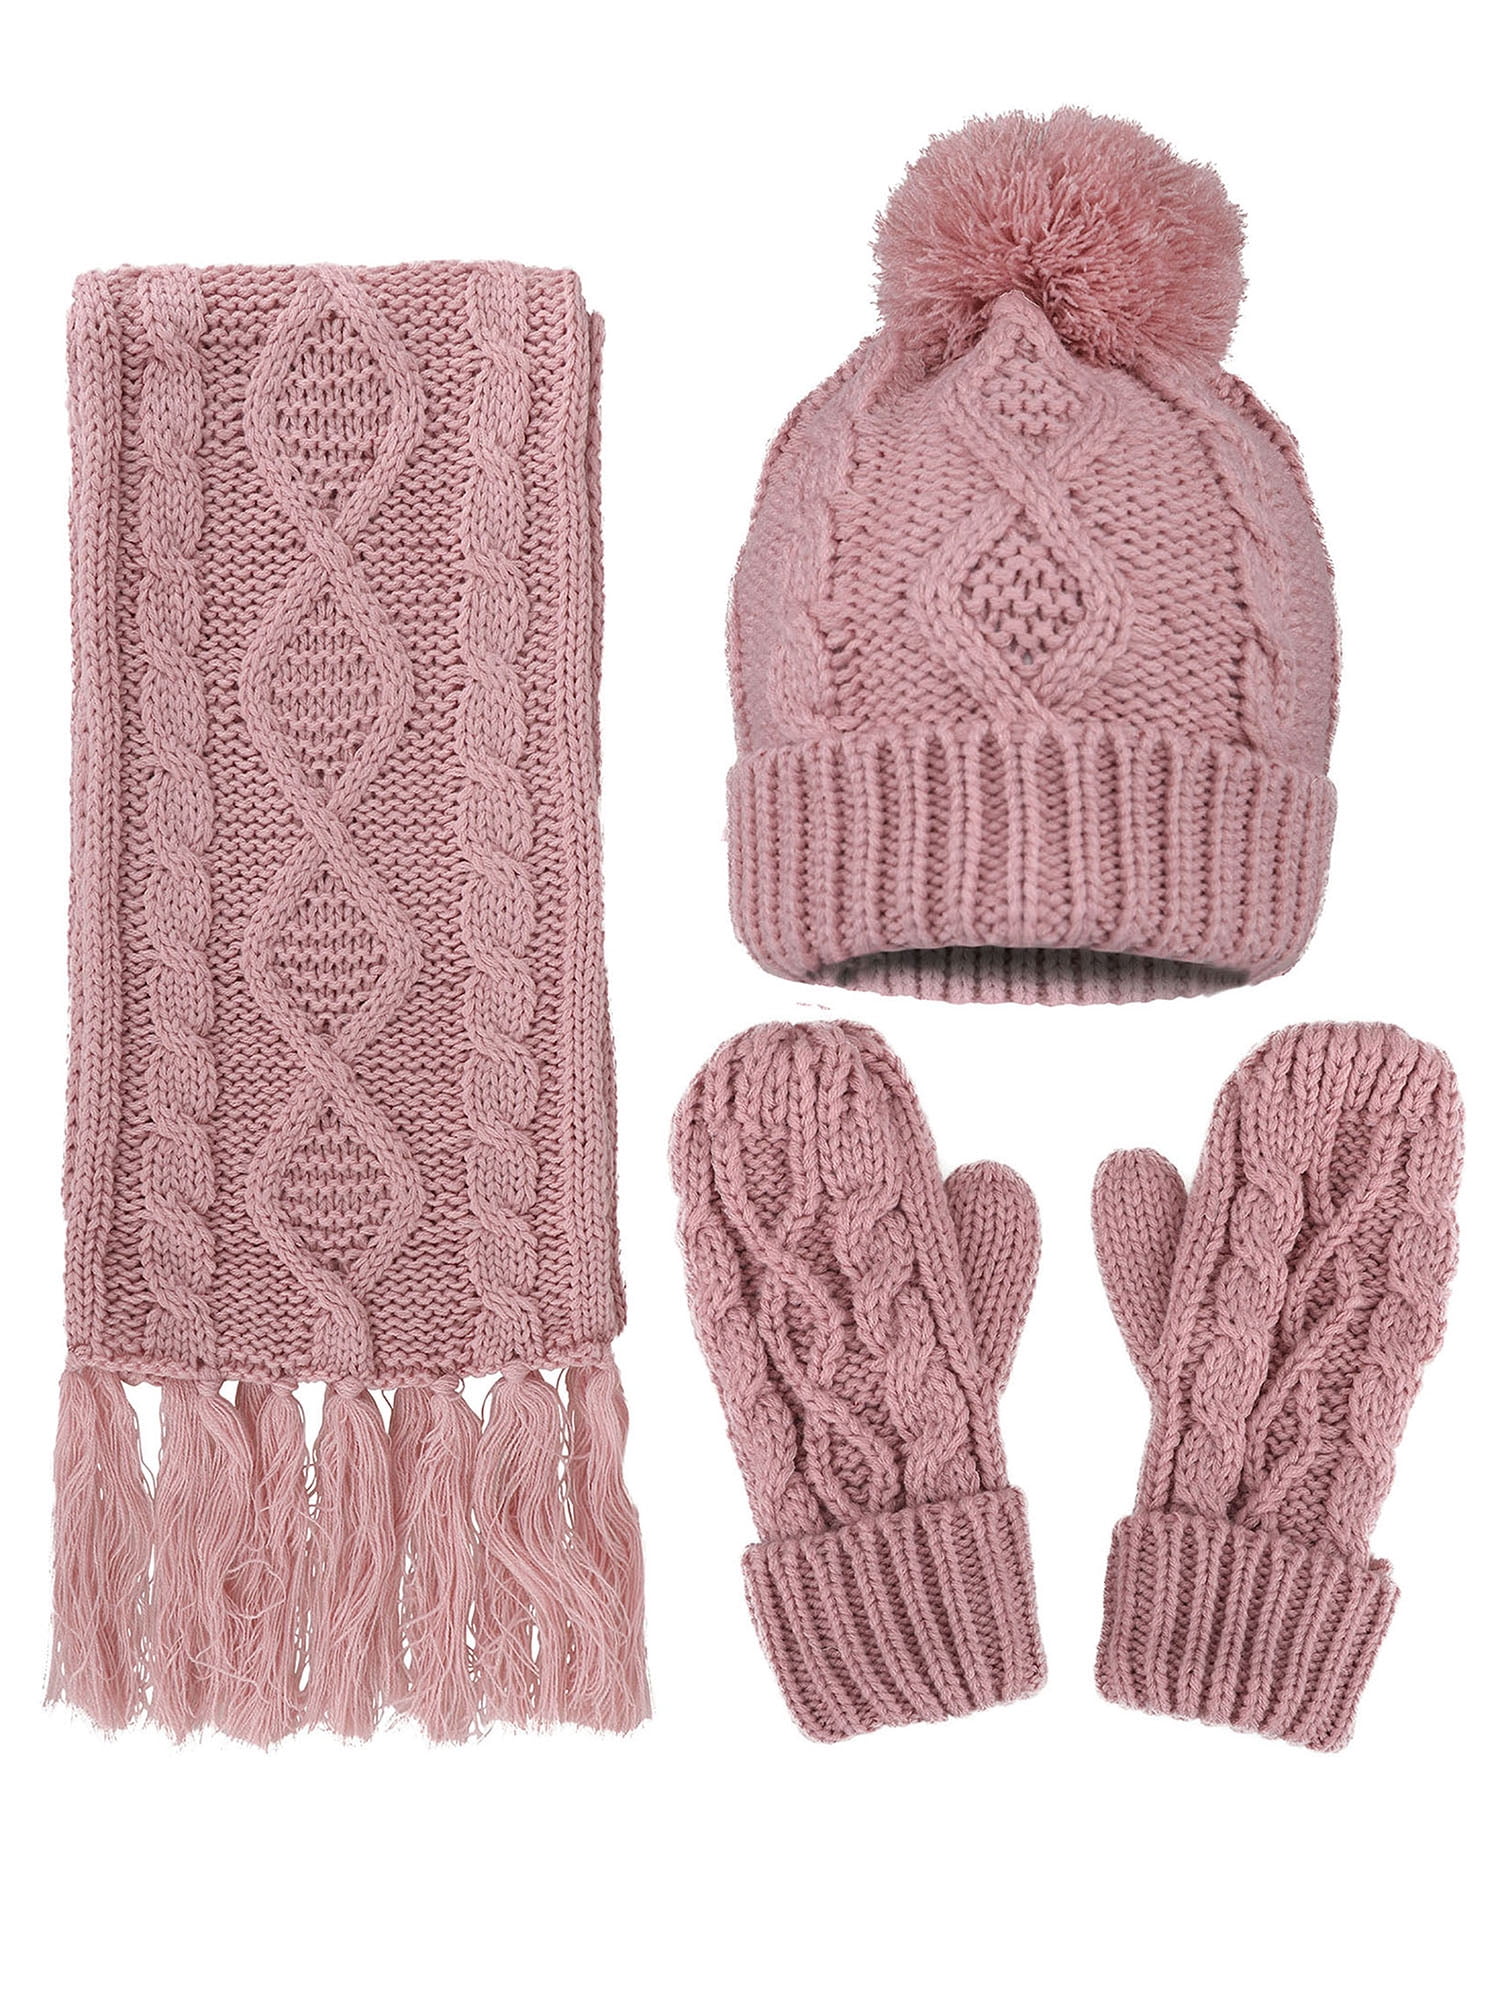 Women's Winter Warm 3PC Navy Cable Knit Gloves Scarf Beanie Hat Set, Pink